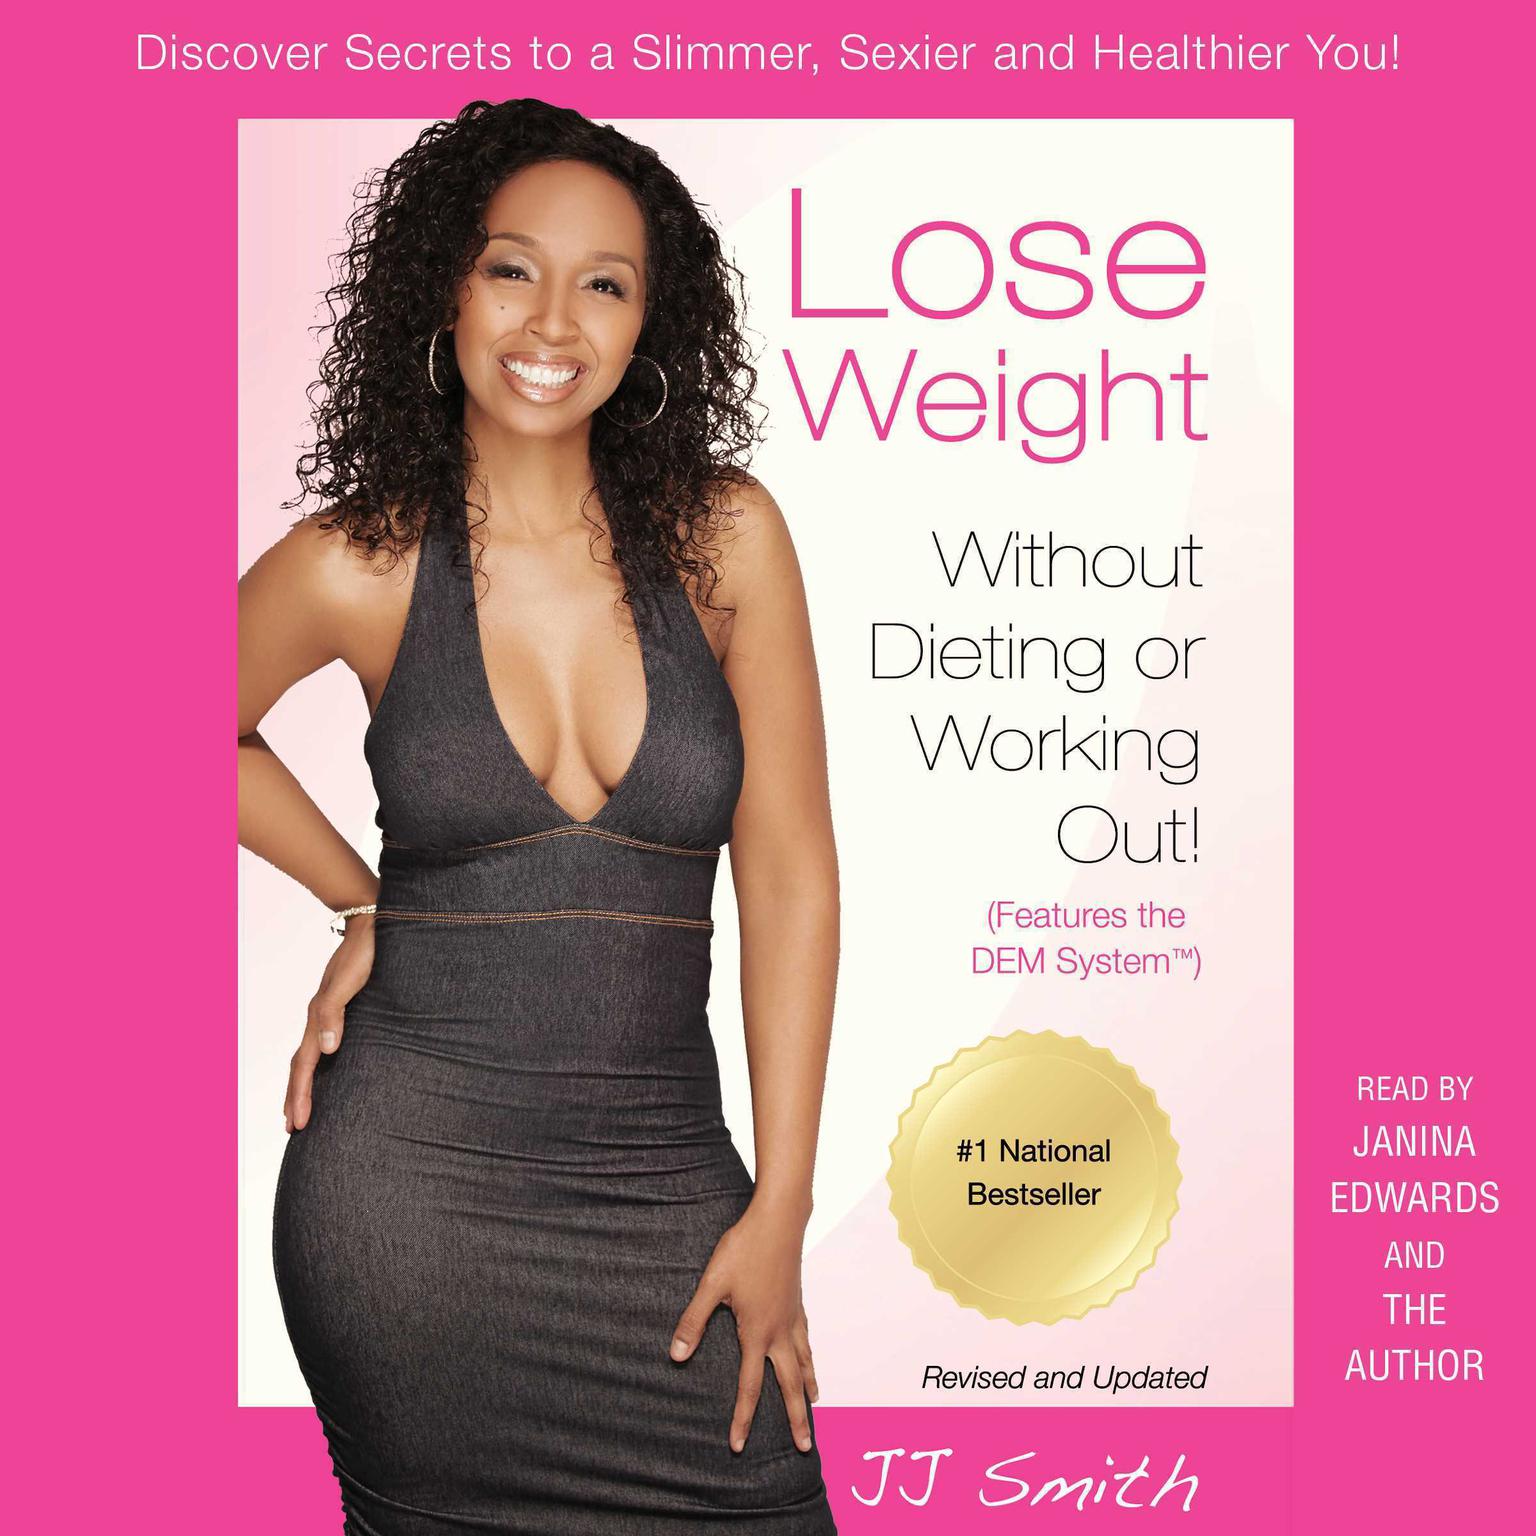 Lose Weight Without Dieting or Working Out: Discover Secrets to a Slimmer, Sexier, and Healthier You Audiobook, by J. J. Smith